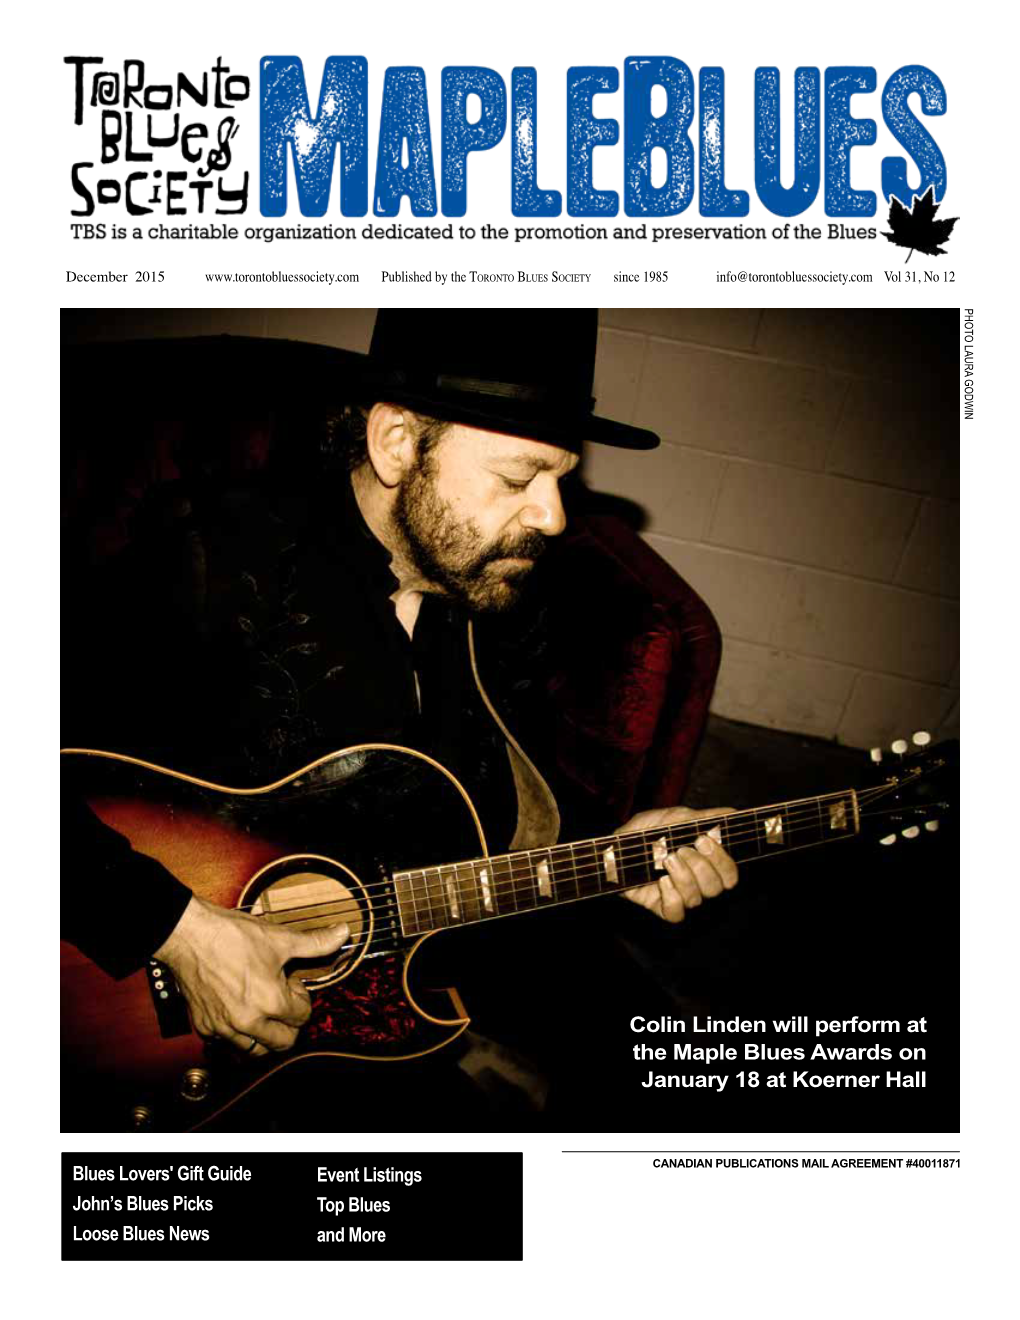 Colin Linden Will Perform at the Maple Blues Awards on January 18 at Koerner Hall